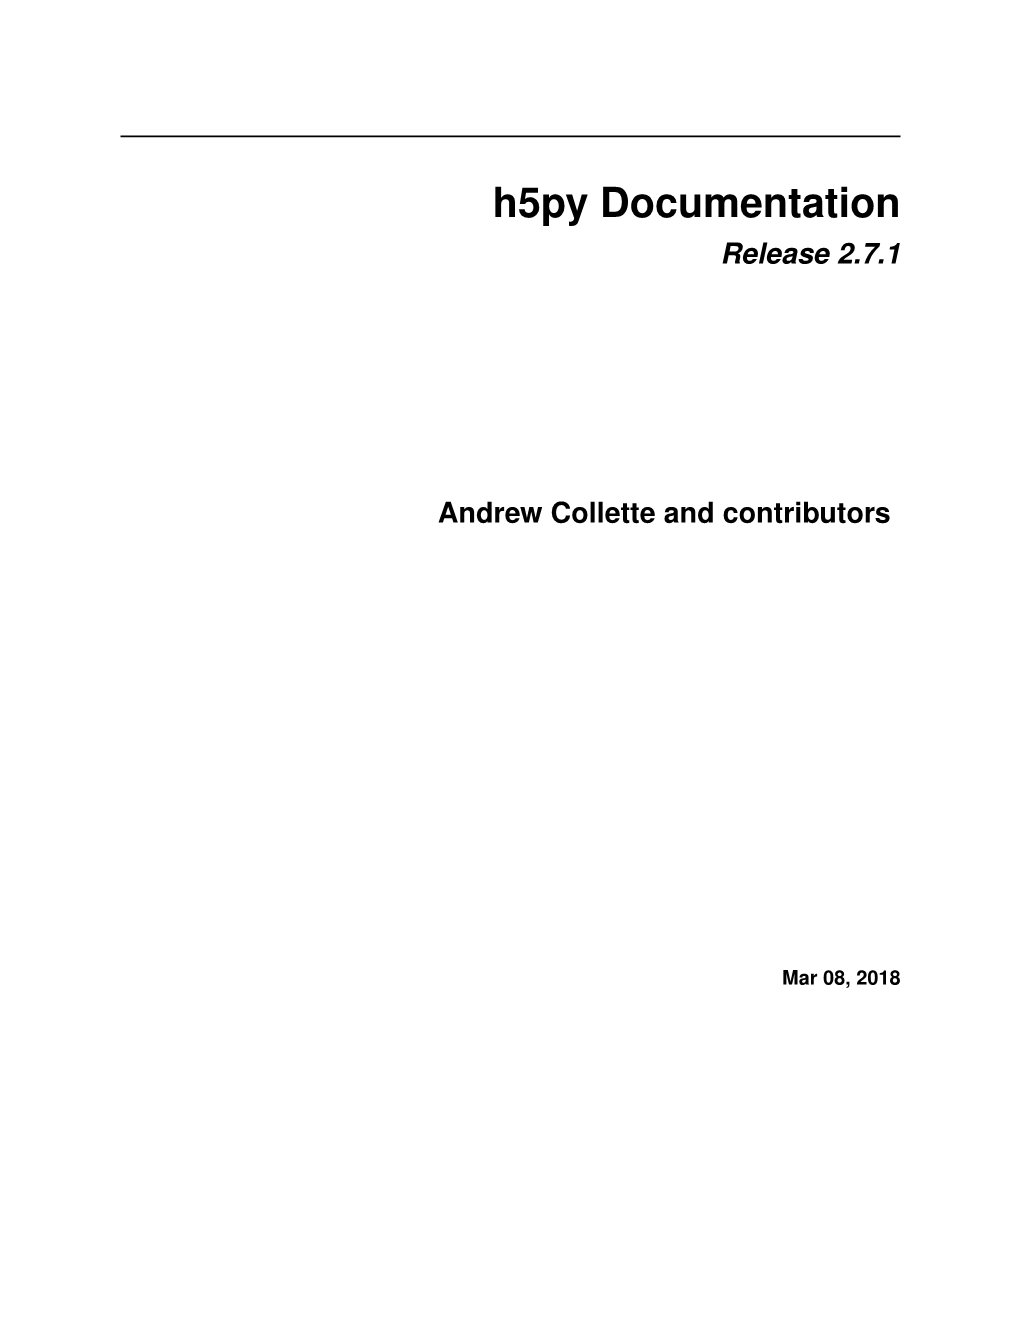 Release 2.7.1 Andrew Collette and Contributors